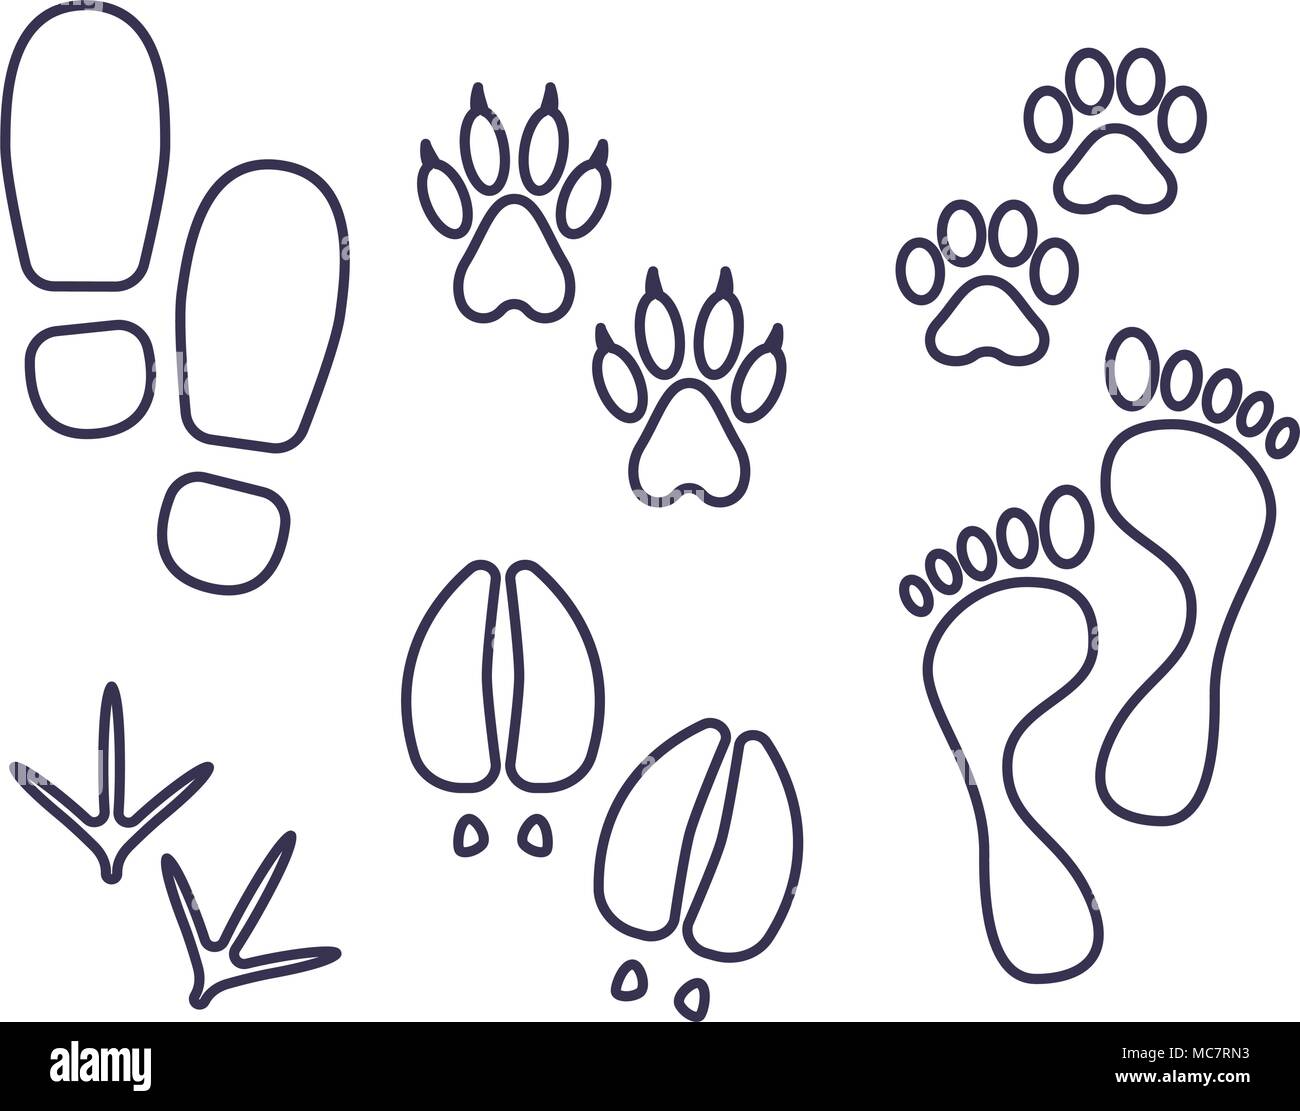 Traces of human and amimals, outline tracks, trials of cat, dog, bird, cow, human Stock Vector